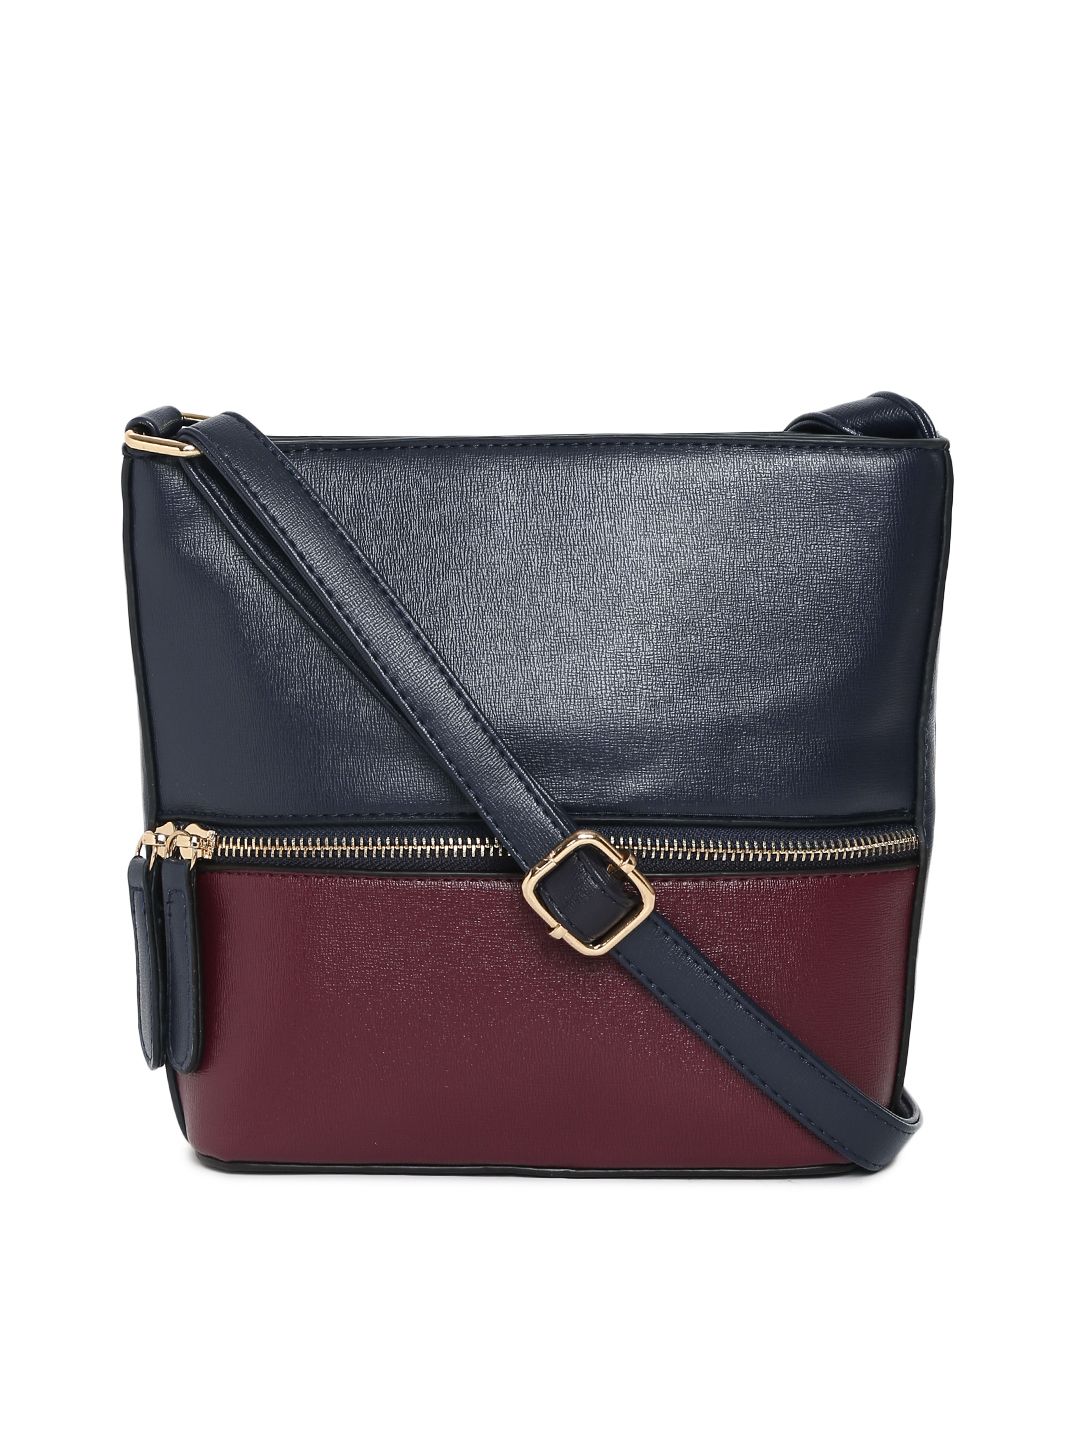 Mast & Harbour Navy Blue & Burgundy Colourblocked Sling Bag Price in India